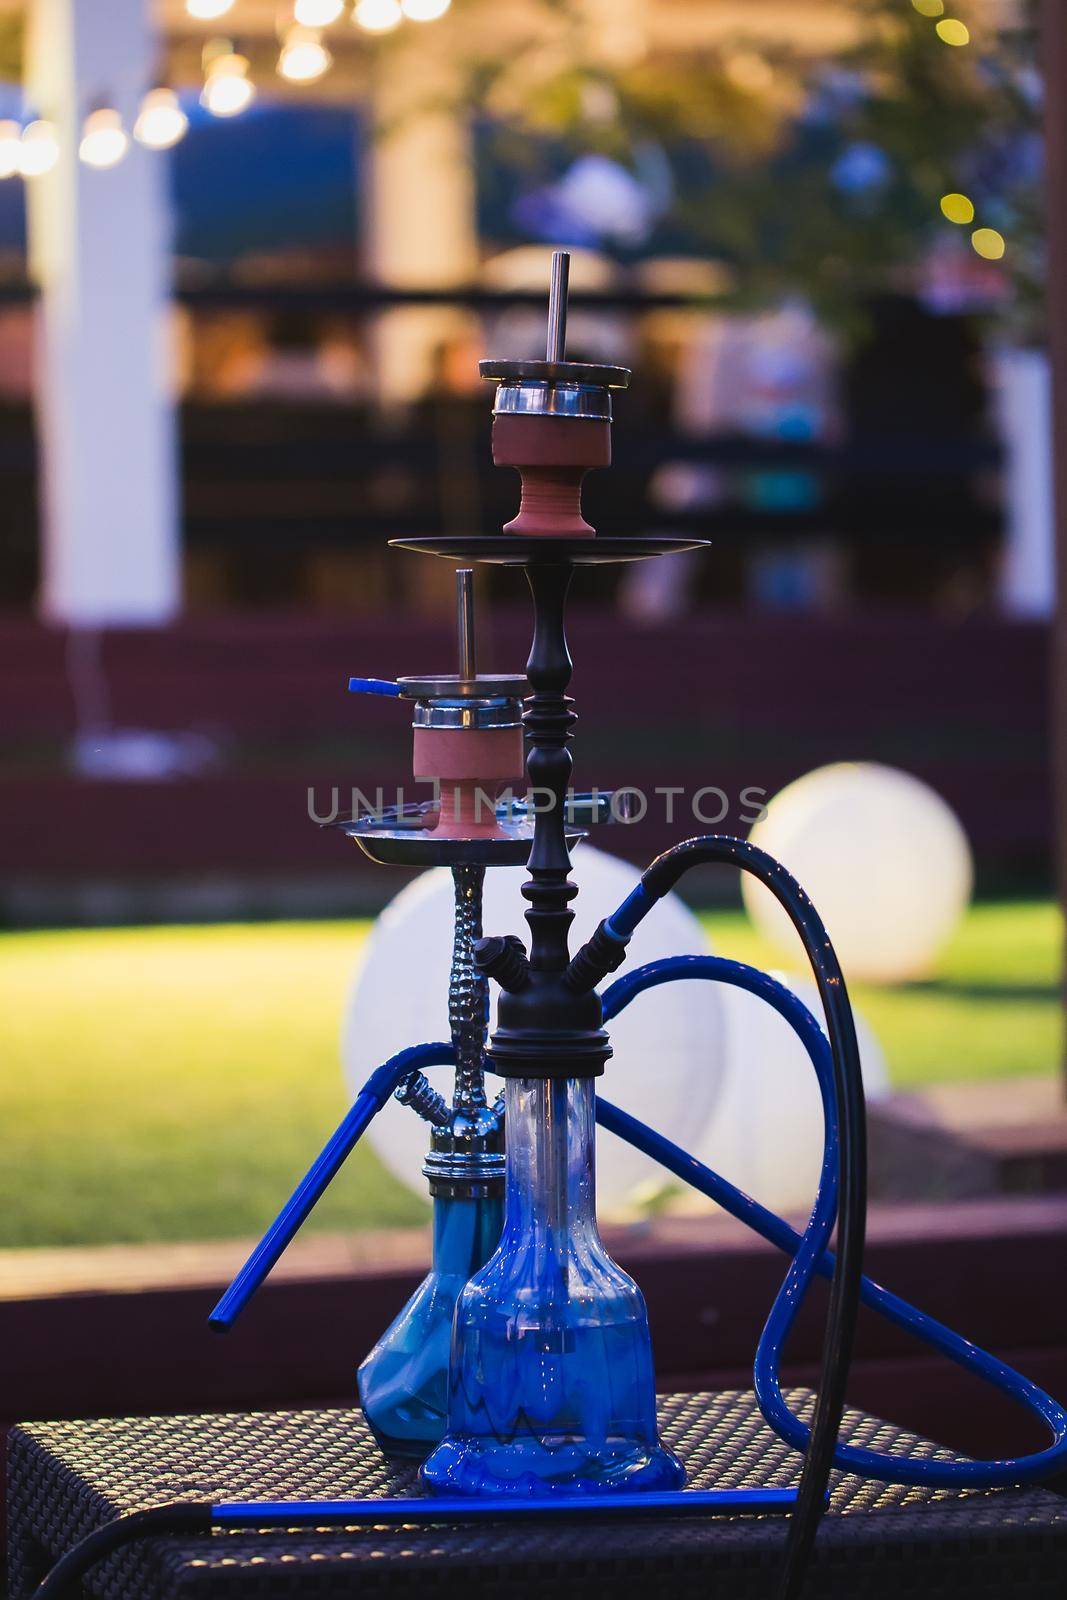 Hookah on the street. Have a nice time with friends by StudioPeace